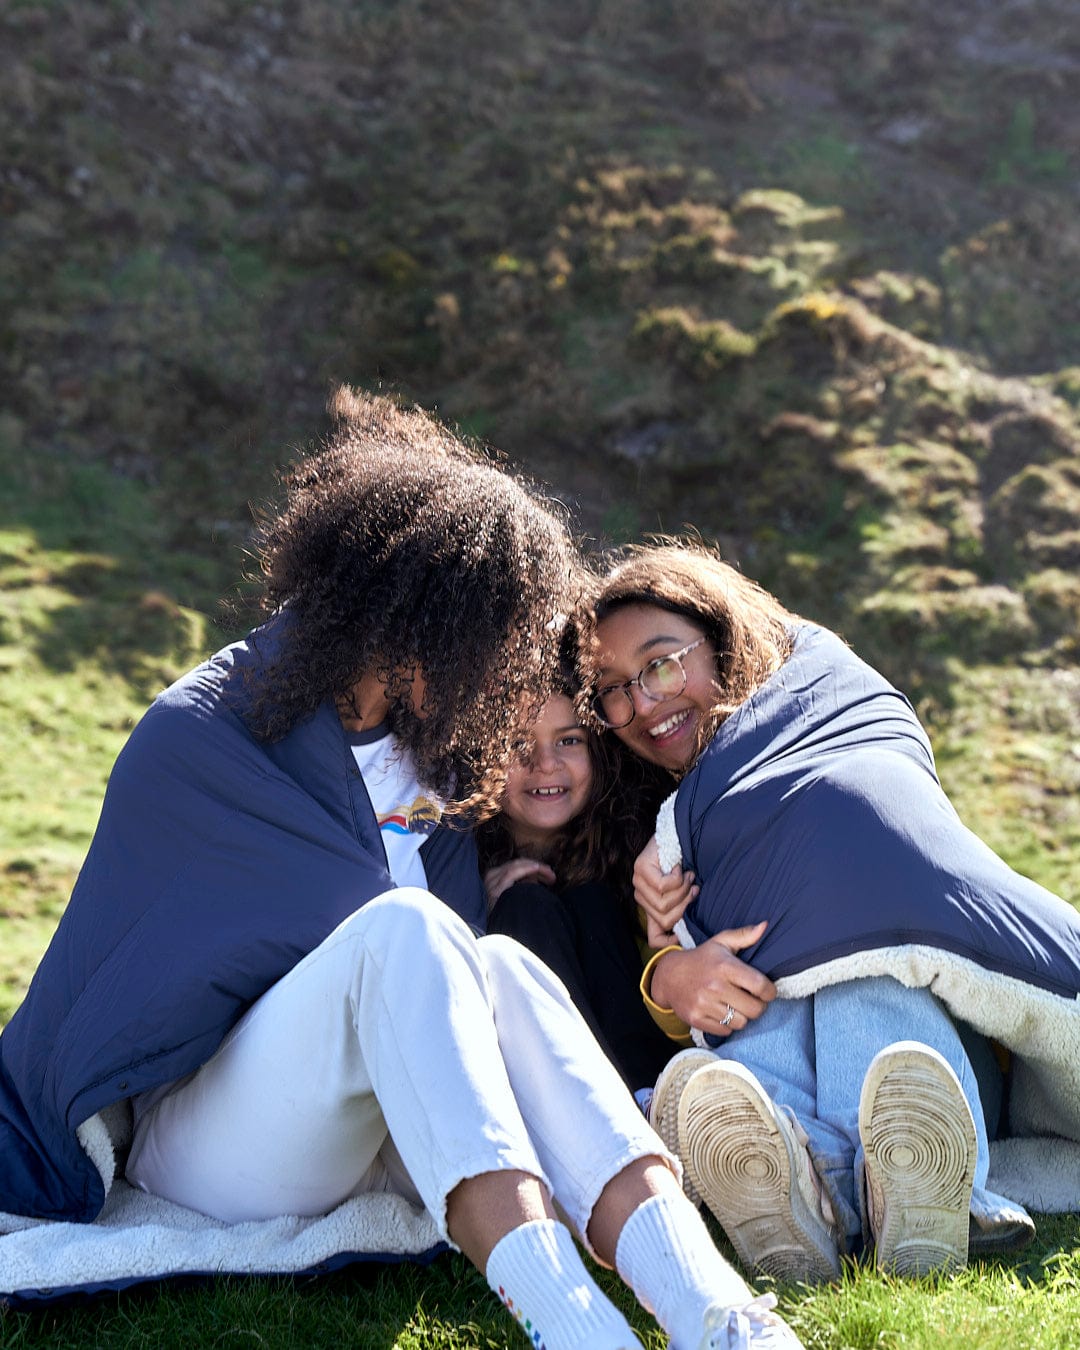 Three women wrapped up in Saltrock's Yogi - Camping Blanket - Blue on a grassy field.